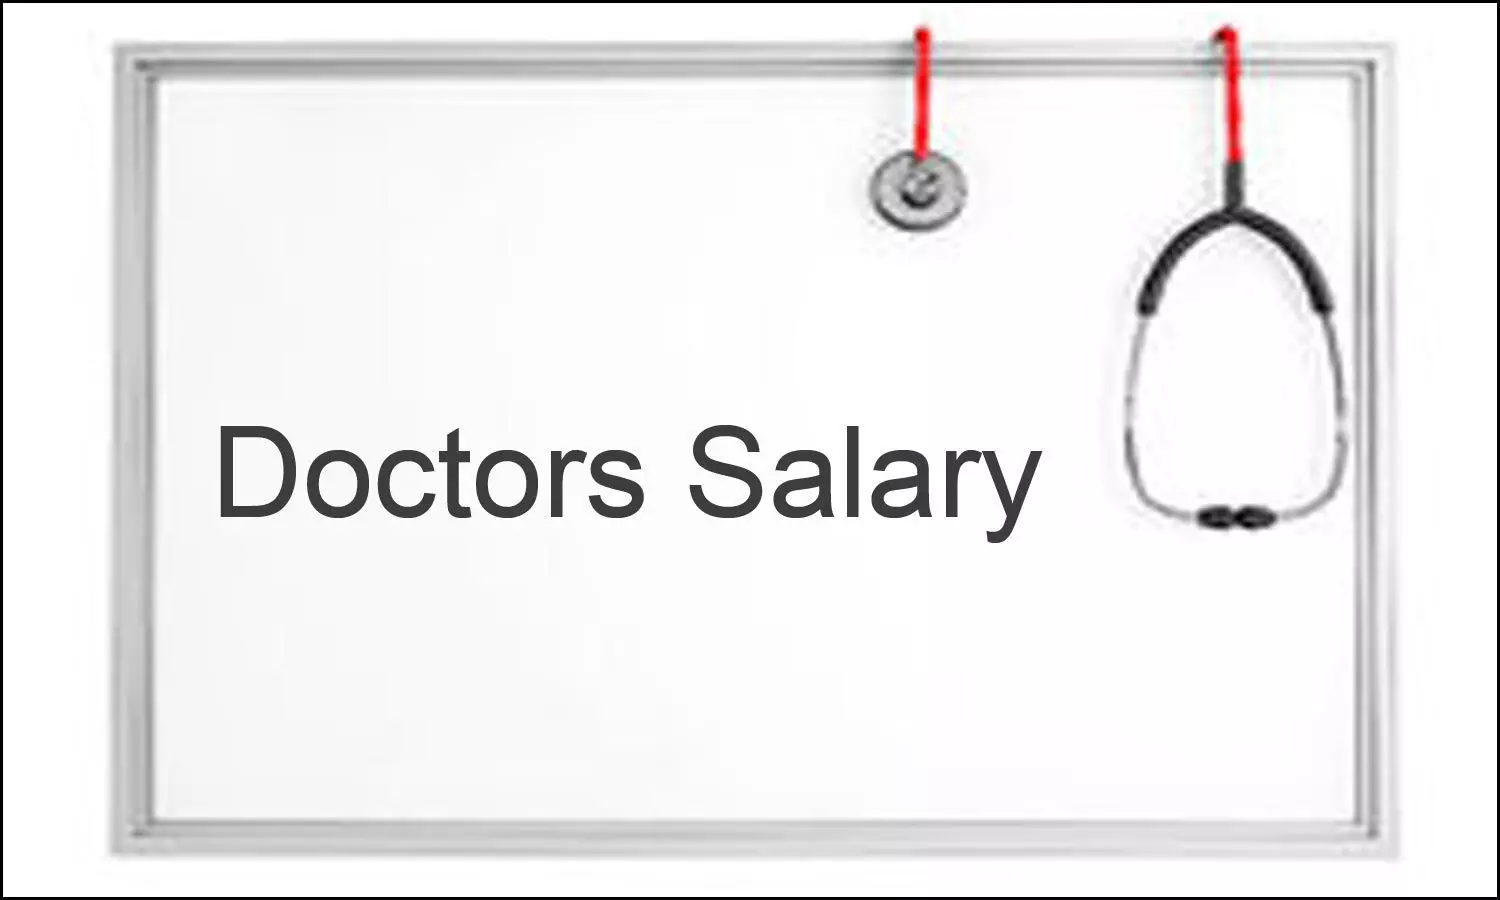 Delhi HC directs North, East MCD to Release October salary of doctors in 2 weeks